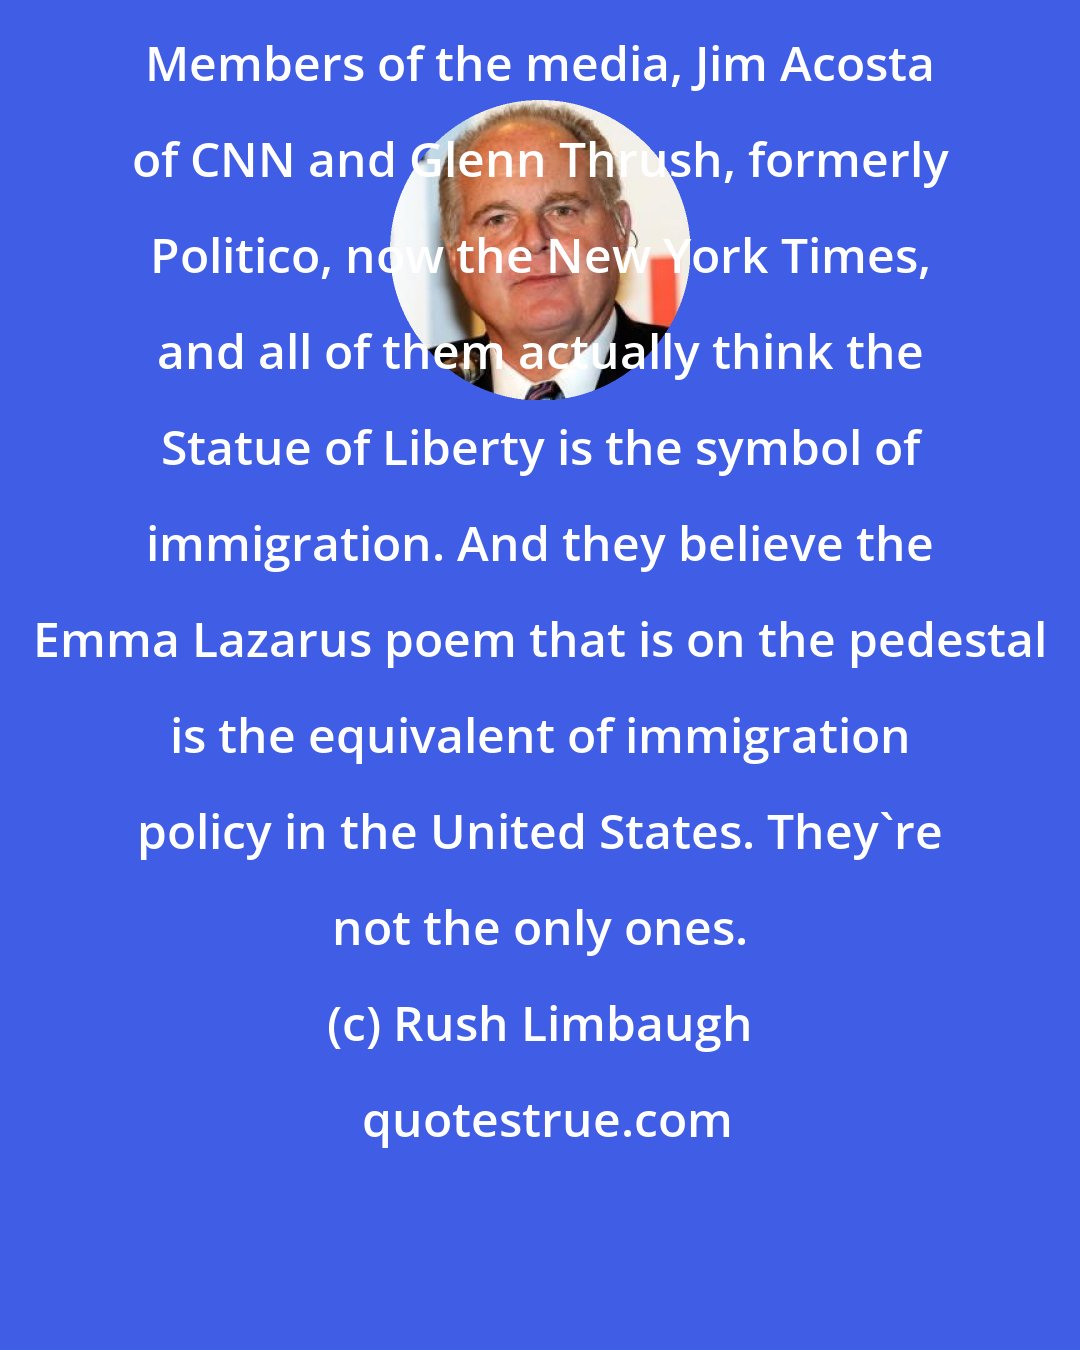 Rush Limbaugh: Members of the media, Jim Acosta of CNN and Glenn Thrush, formerly Politico, now the New York Times, and all of them actually think the Statue of Liberty is the symbol of immigration. And they believe the Emma Lazarus poem that is on the pedestal is the equivalent of immigration policy in the United States. They're not the only ones.